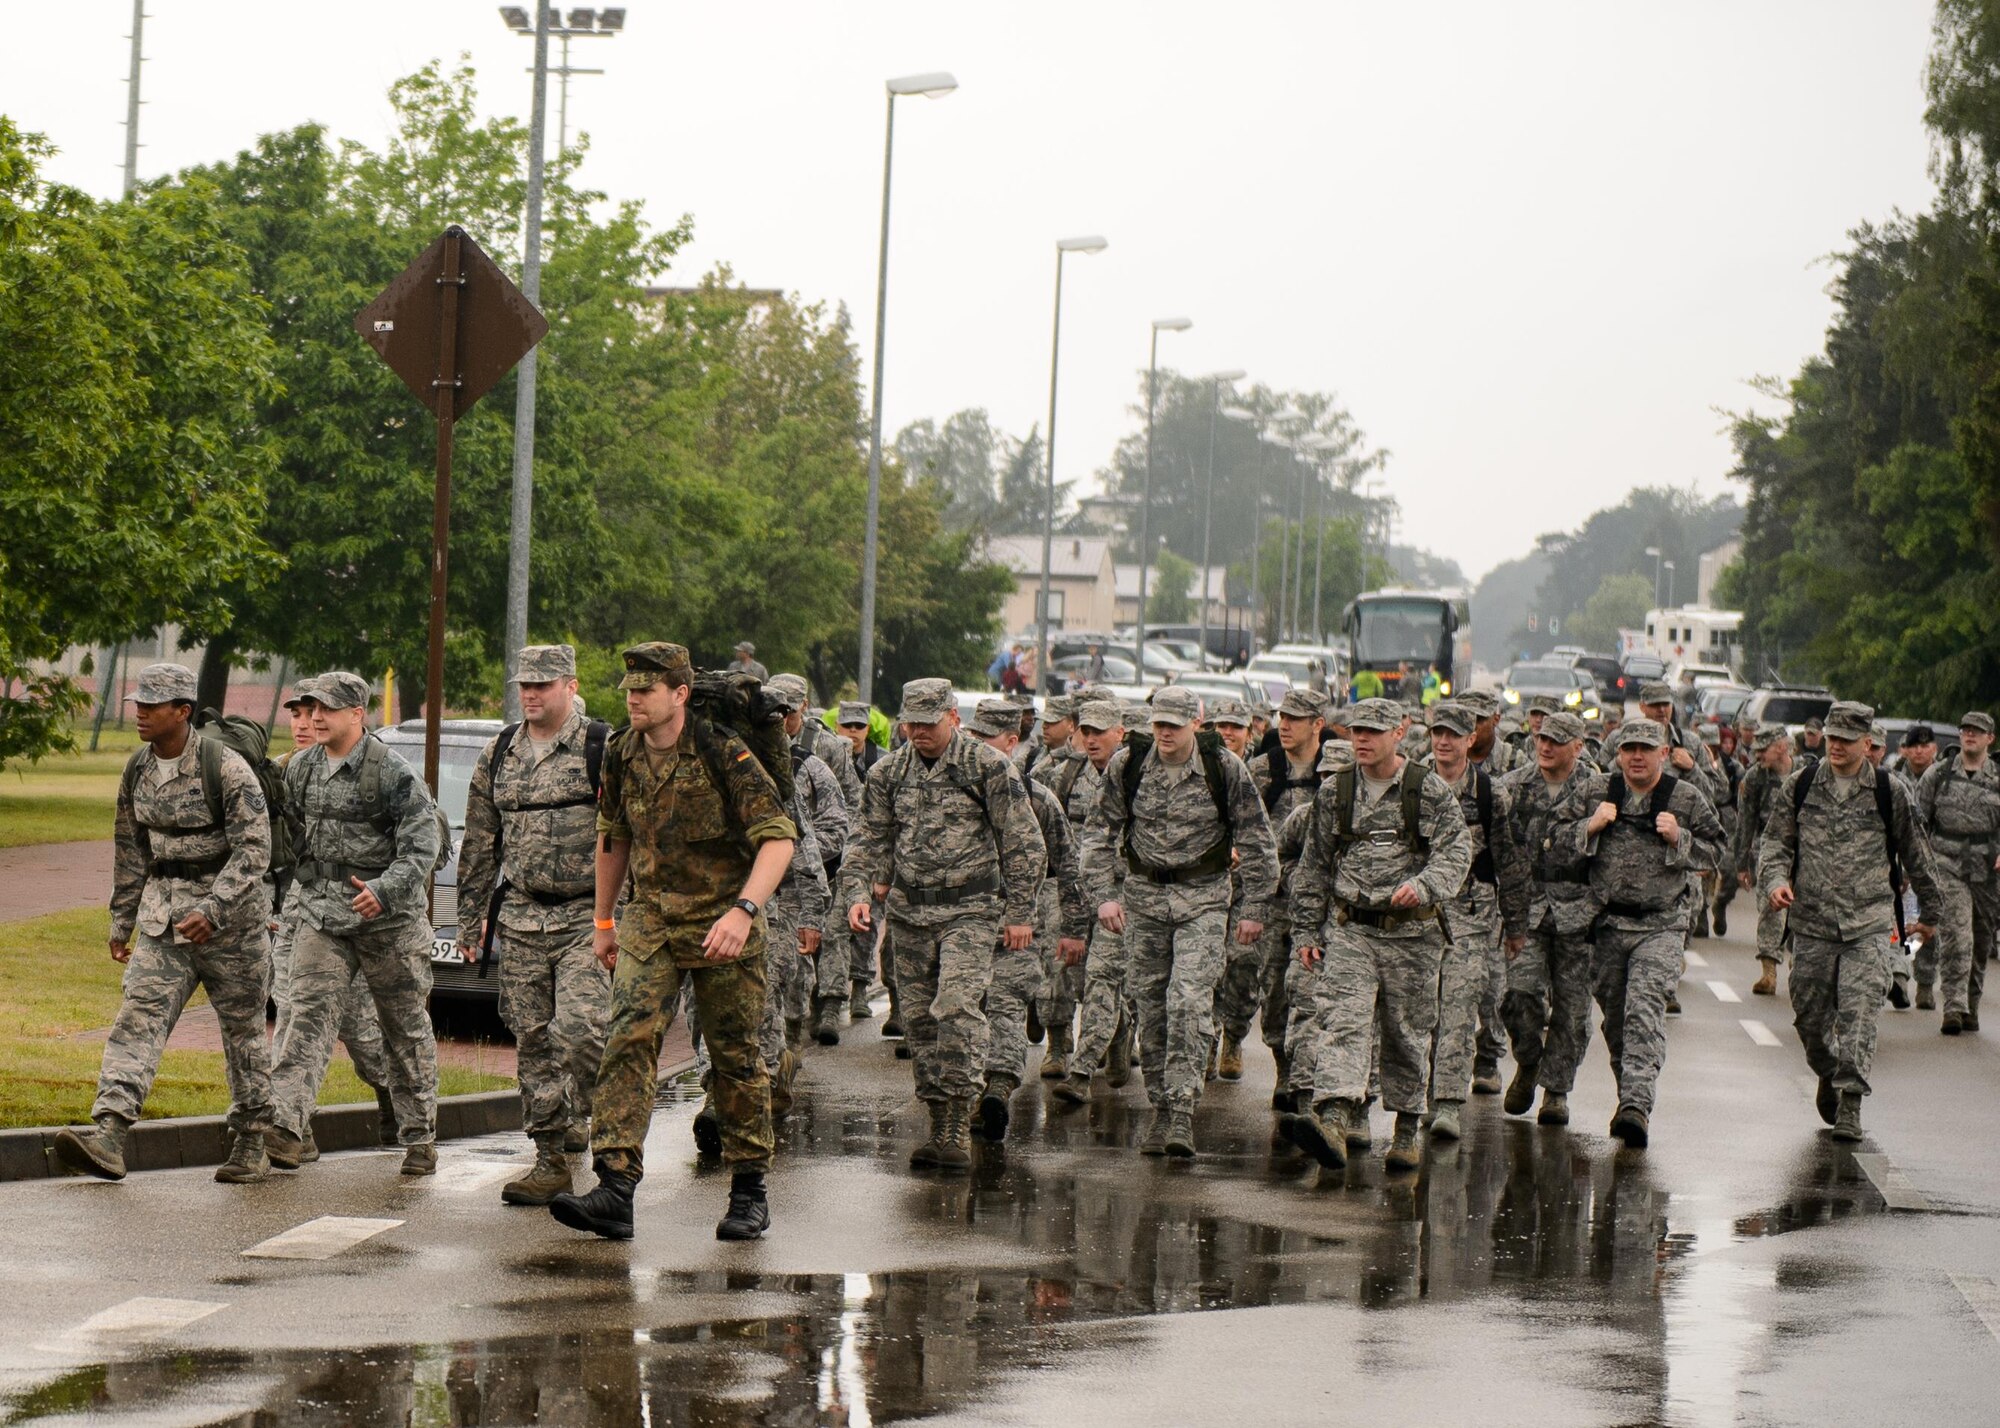 Members of the Kaiserslautern Military Community march during the first Chief Master Sgt. Paul Airey Memorial ruck-run at Ramstein Air Base, Germany, May 27, 2016. The ruck-run was completed by more than 300 participants in remembrance of the march Airey completed as a prisoner of war. (U.S. Air Force photo/Staff Sgt. Armando A. Schwier-Morales)